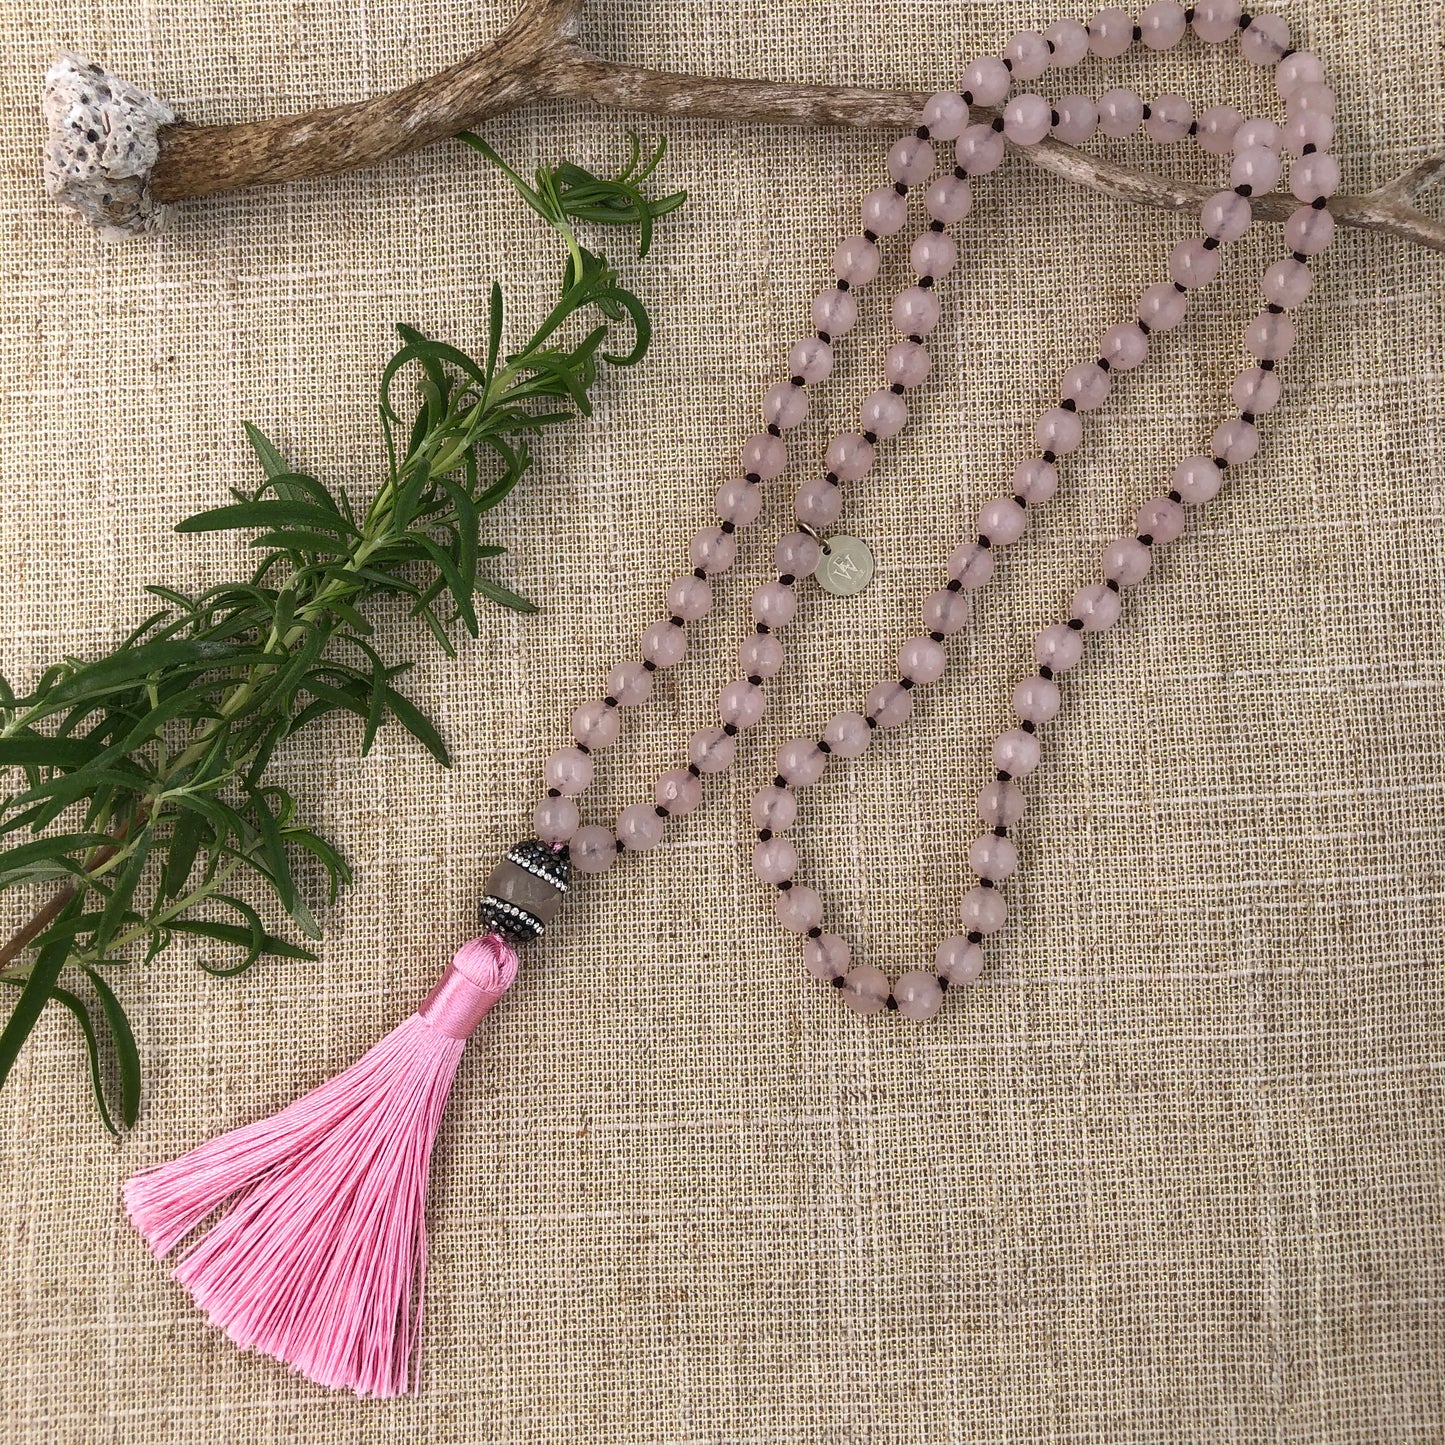 Hand Knotted Rose Quartz Necklace it has an Embellished Beads and Silk Tassel